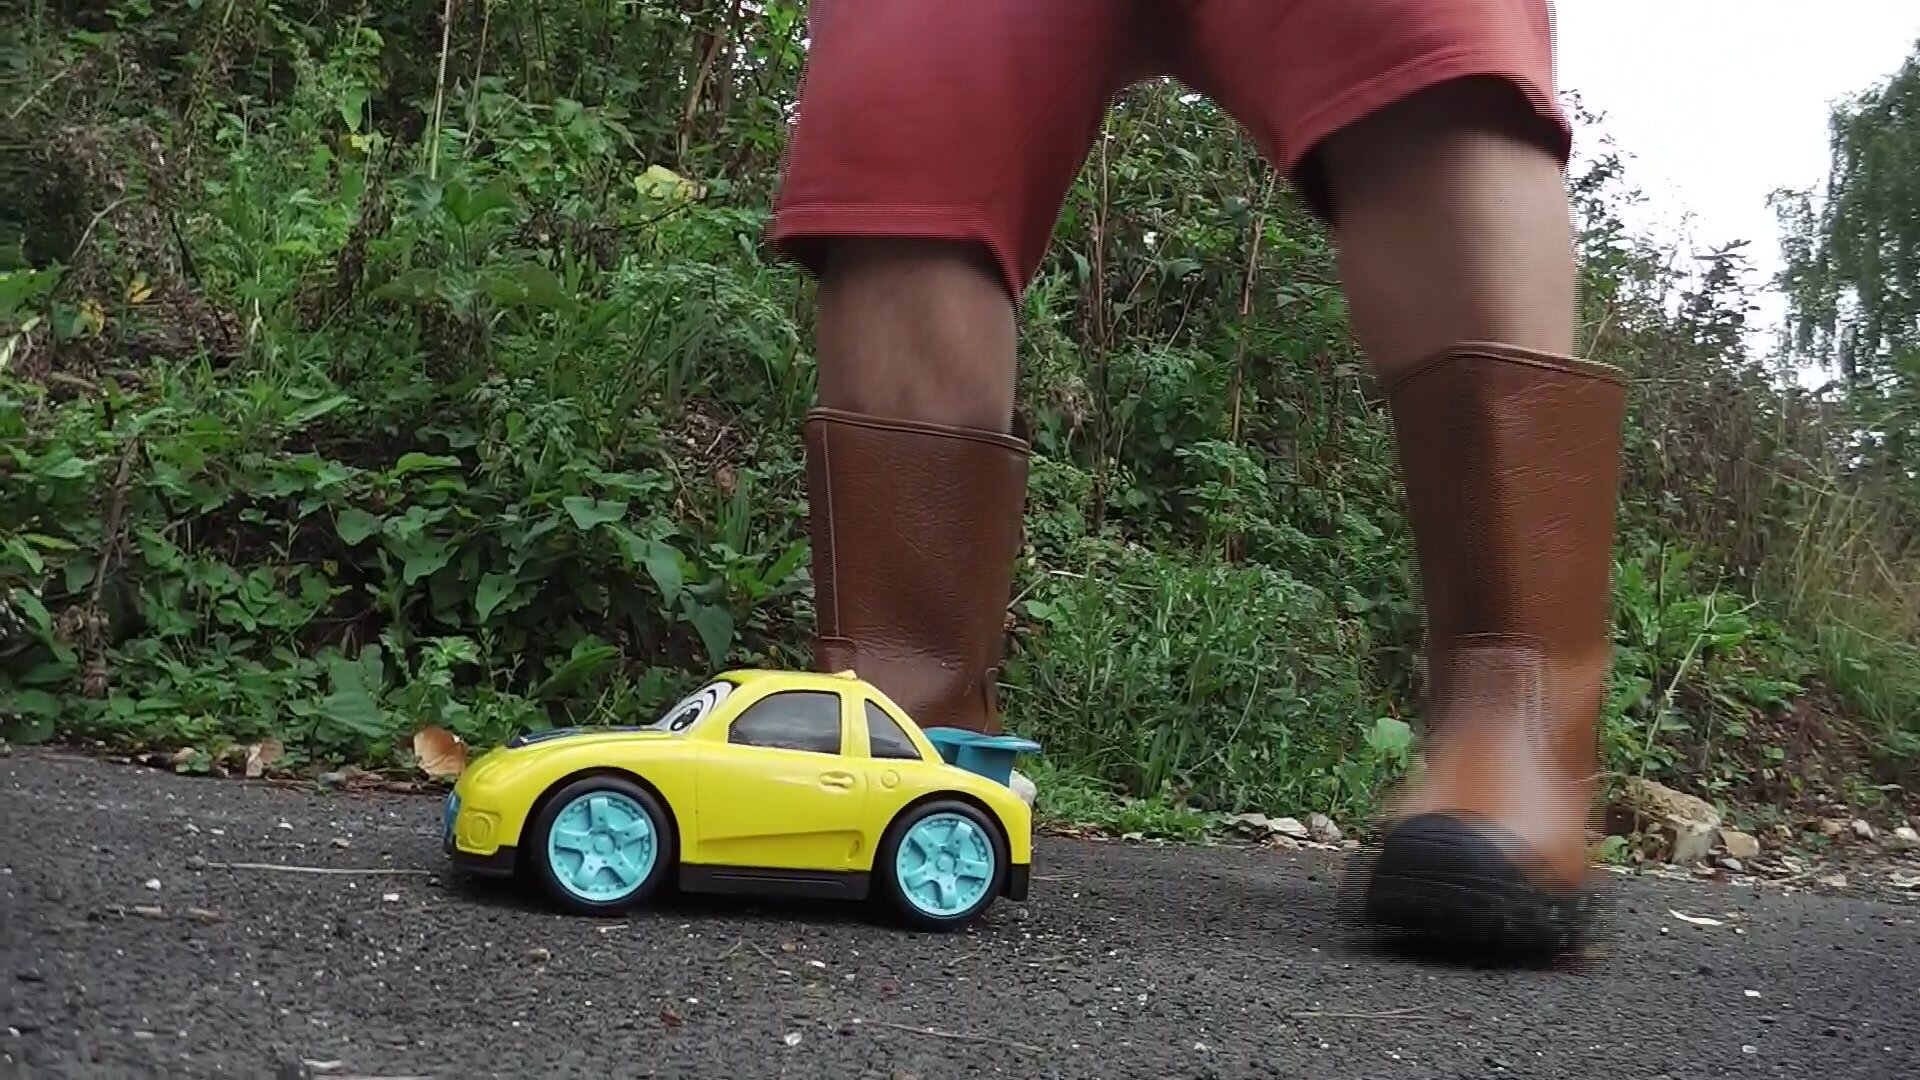 Master Bradders Crushing & Stomping a Toy Car in Rigger Boots